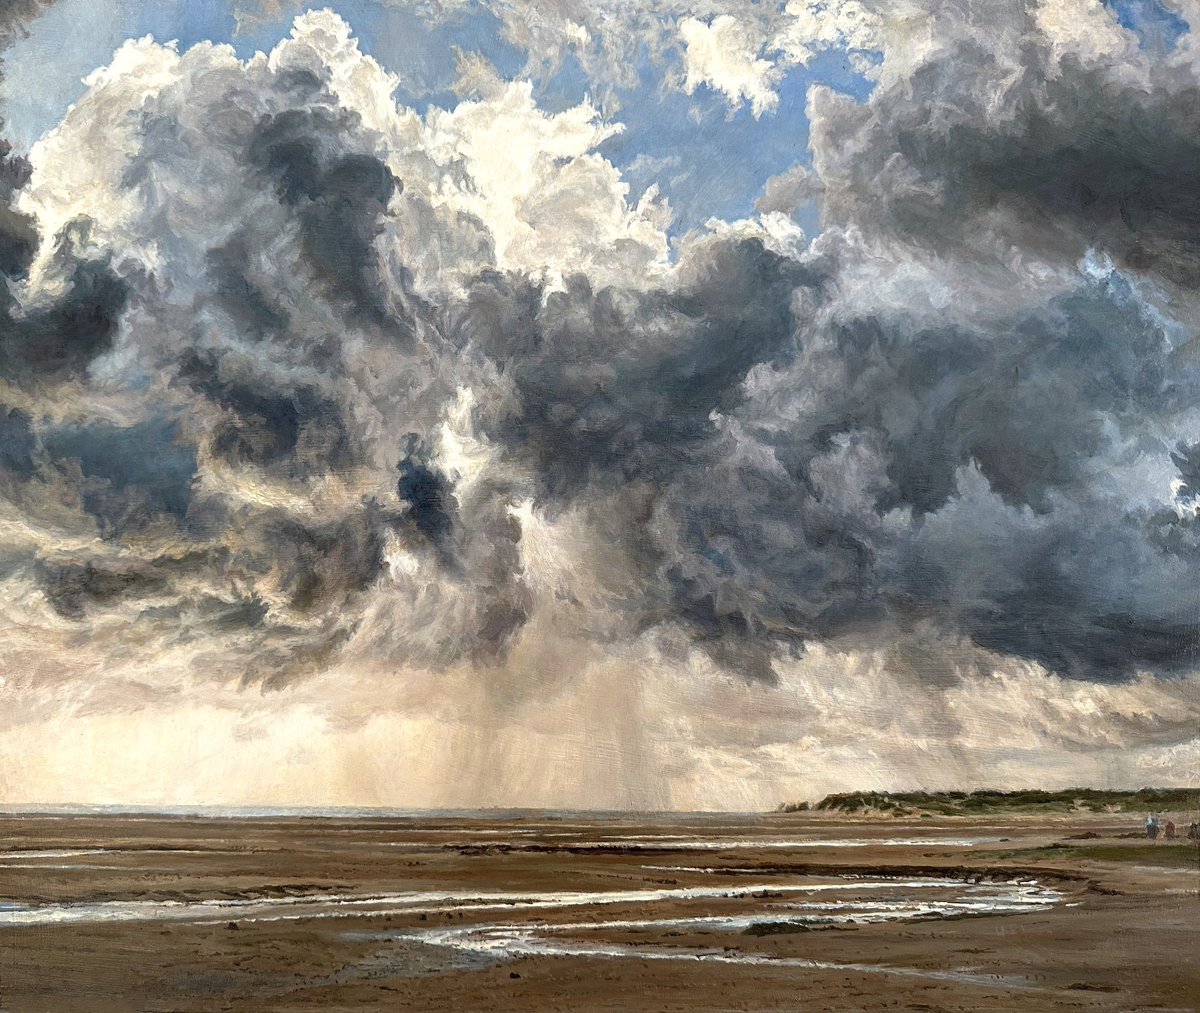 Lowtide, North Norfolk. Oil on panel. Exhibiting soon...
#oilpainting #landscapeartist #painting #norfolk #clouds #beaches #seascape #exhibition 
bitly.ws/YRud